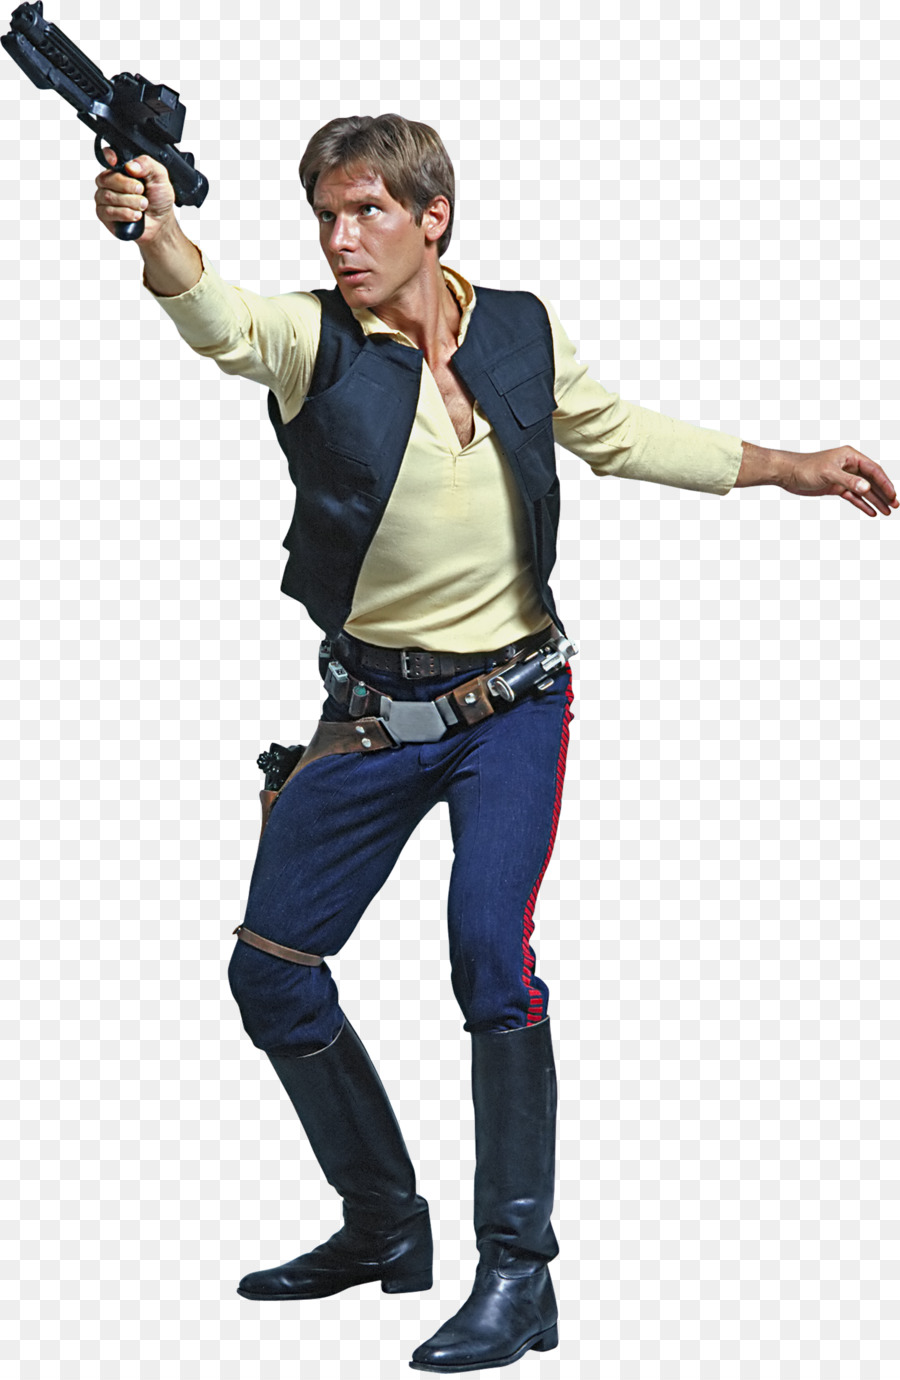 Han Solo Luke Skywalker Chewbacca Leia Organa Solo: A Star Wars Story - cosplay png download - 2620*4000 - Free Transparent Han Solo png Download.